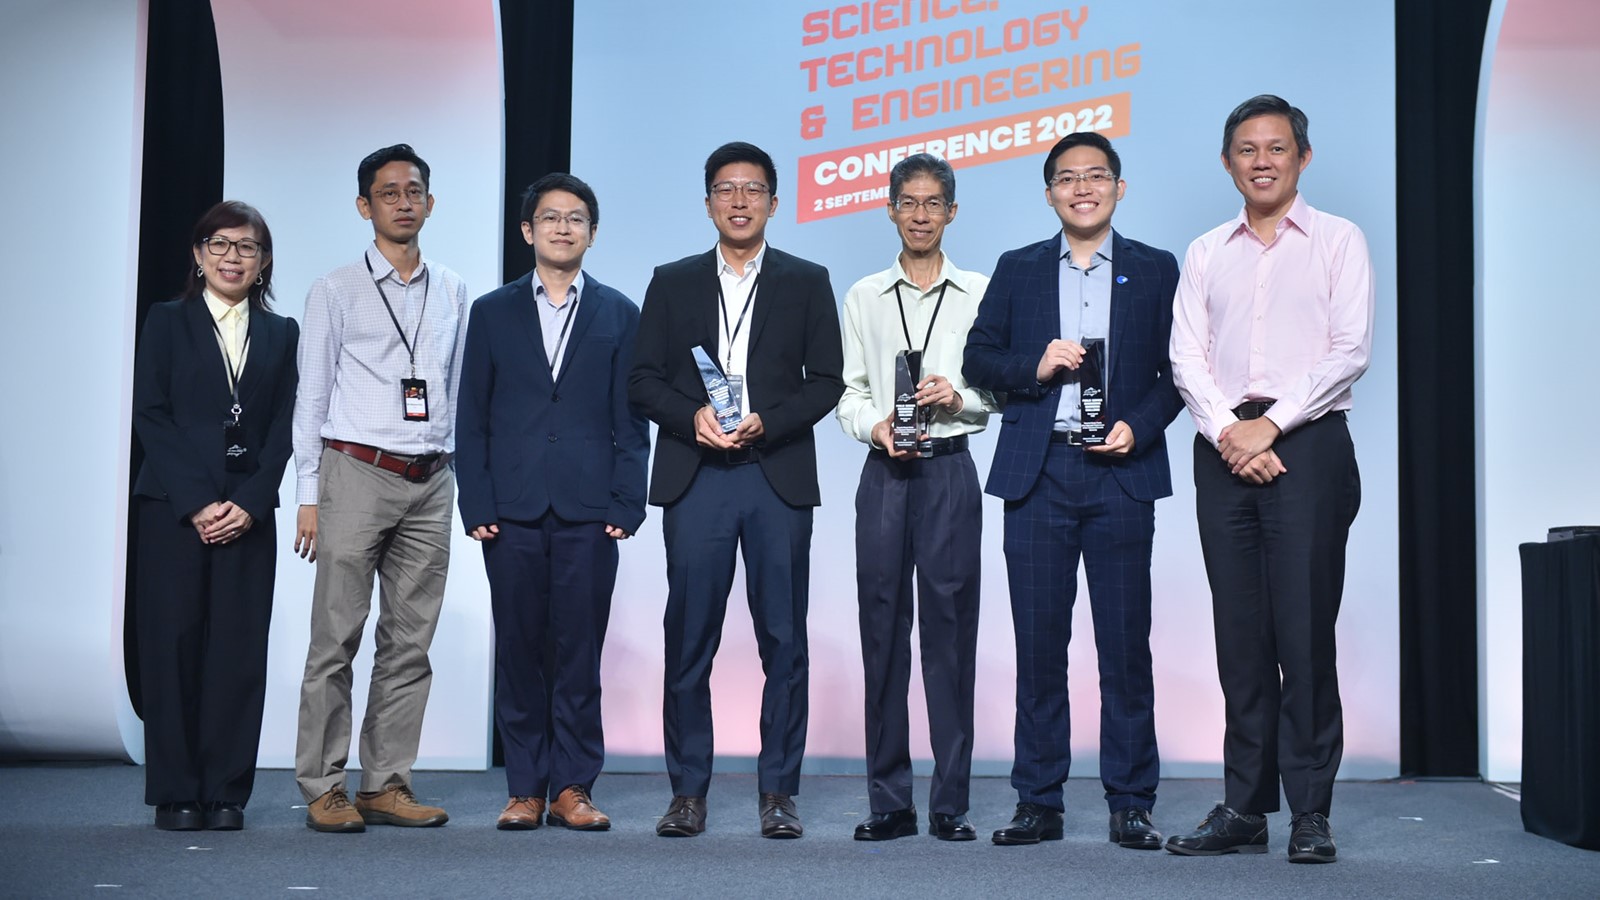 The project team, comprising members from TP, NEA, and JTC, receiving an award from Minister for Education Chan Chun Sing at STE Conference 2022. They were recognised for their collective efforts to study the feasibility of substituting sand in concrete with recycled plastic waste. Photo credit: Prime Minister's Office